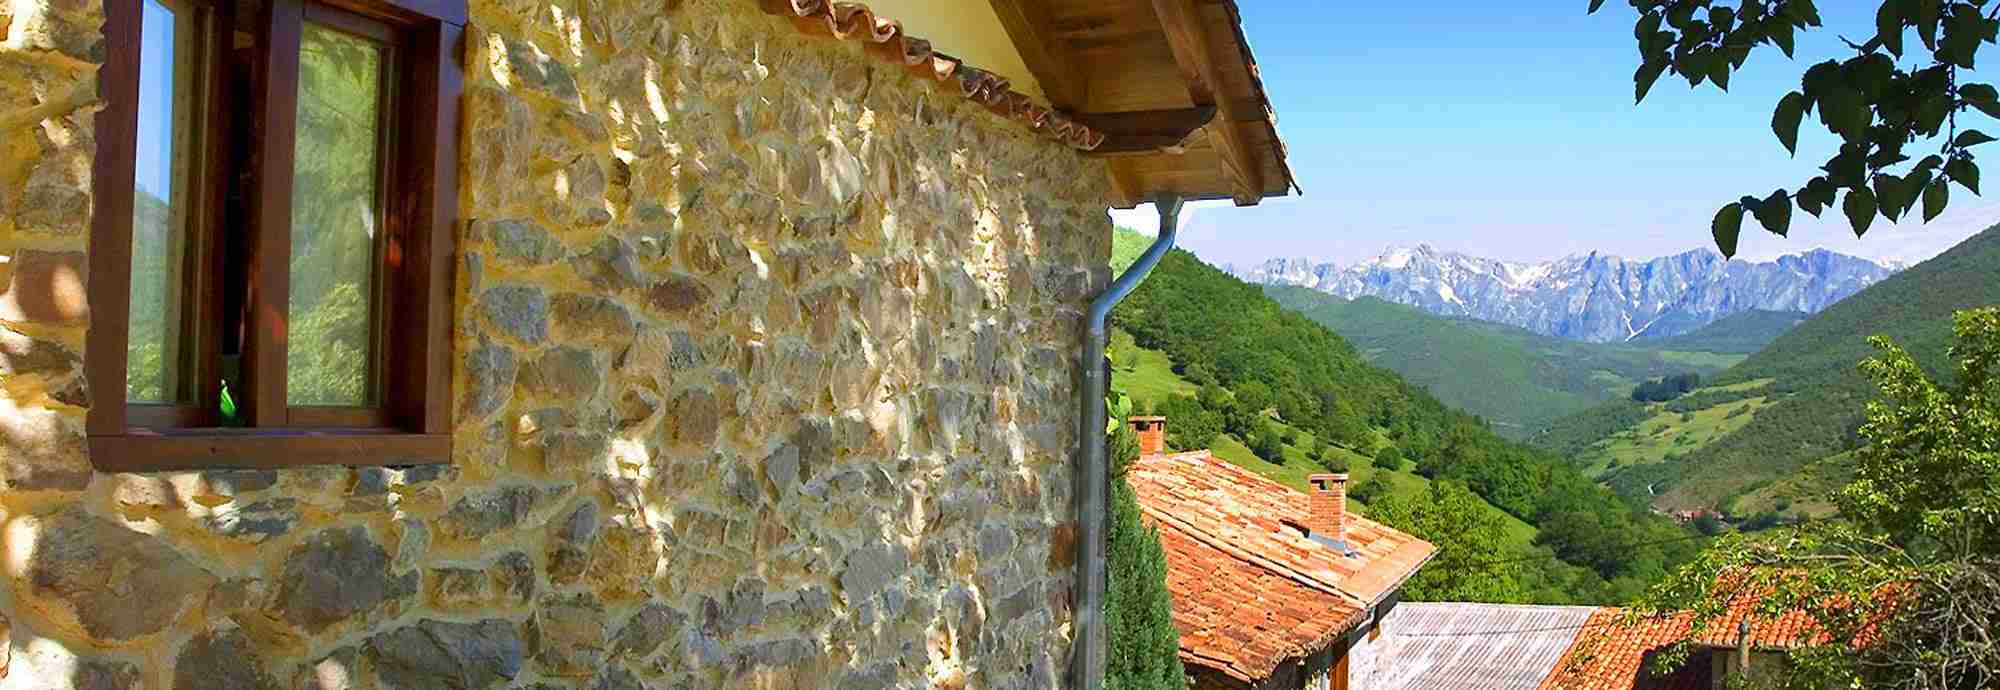 Holiday cottage in fabulous setting, Picos de Europa, Cantabria